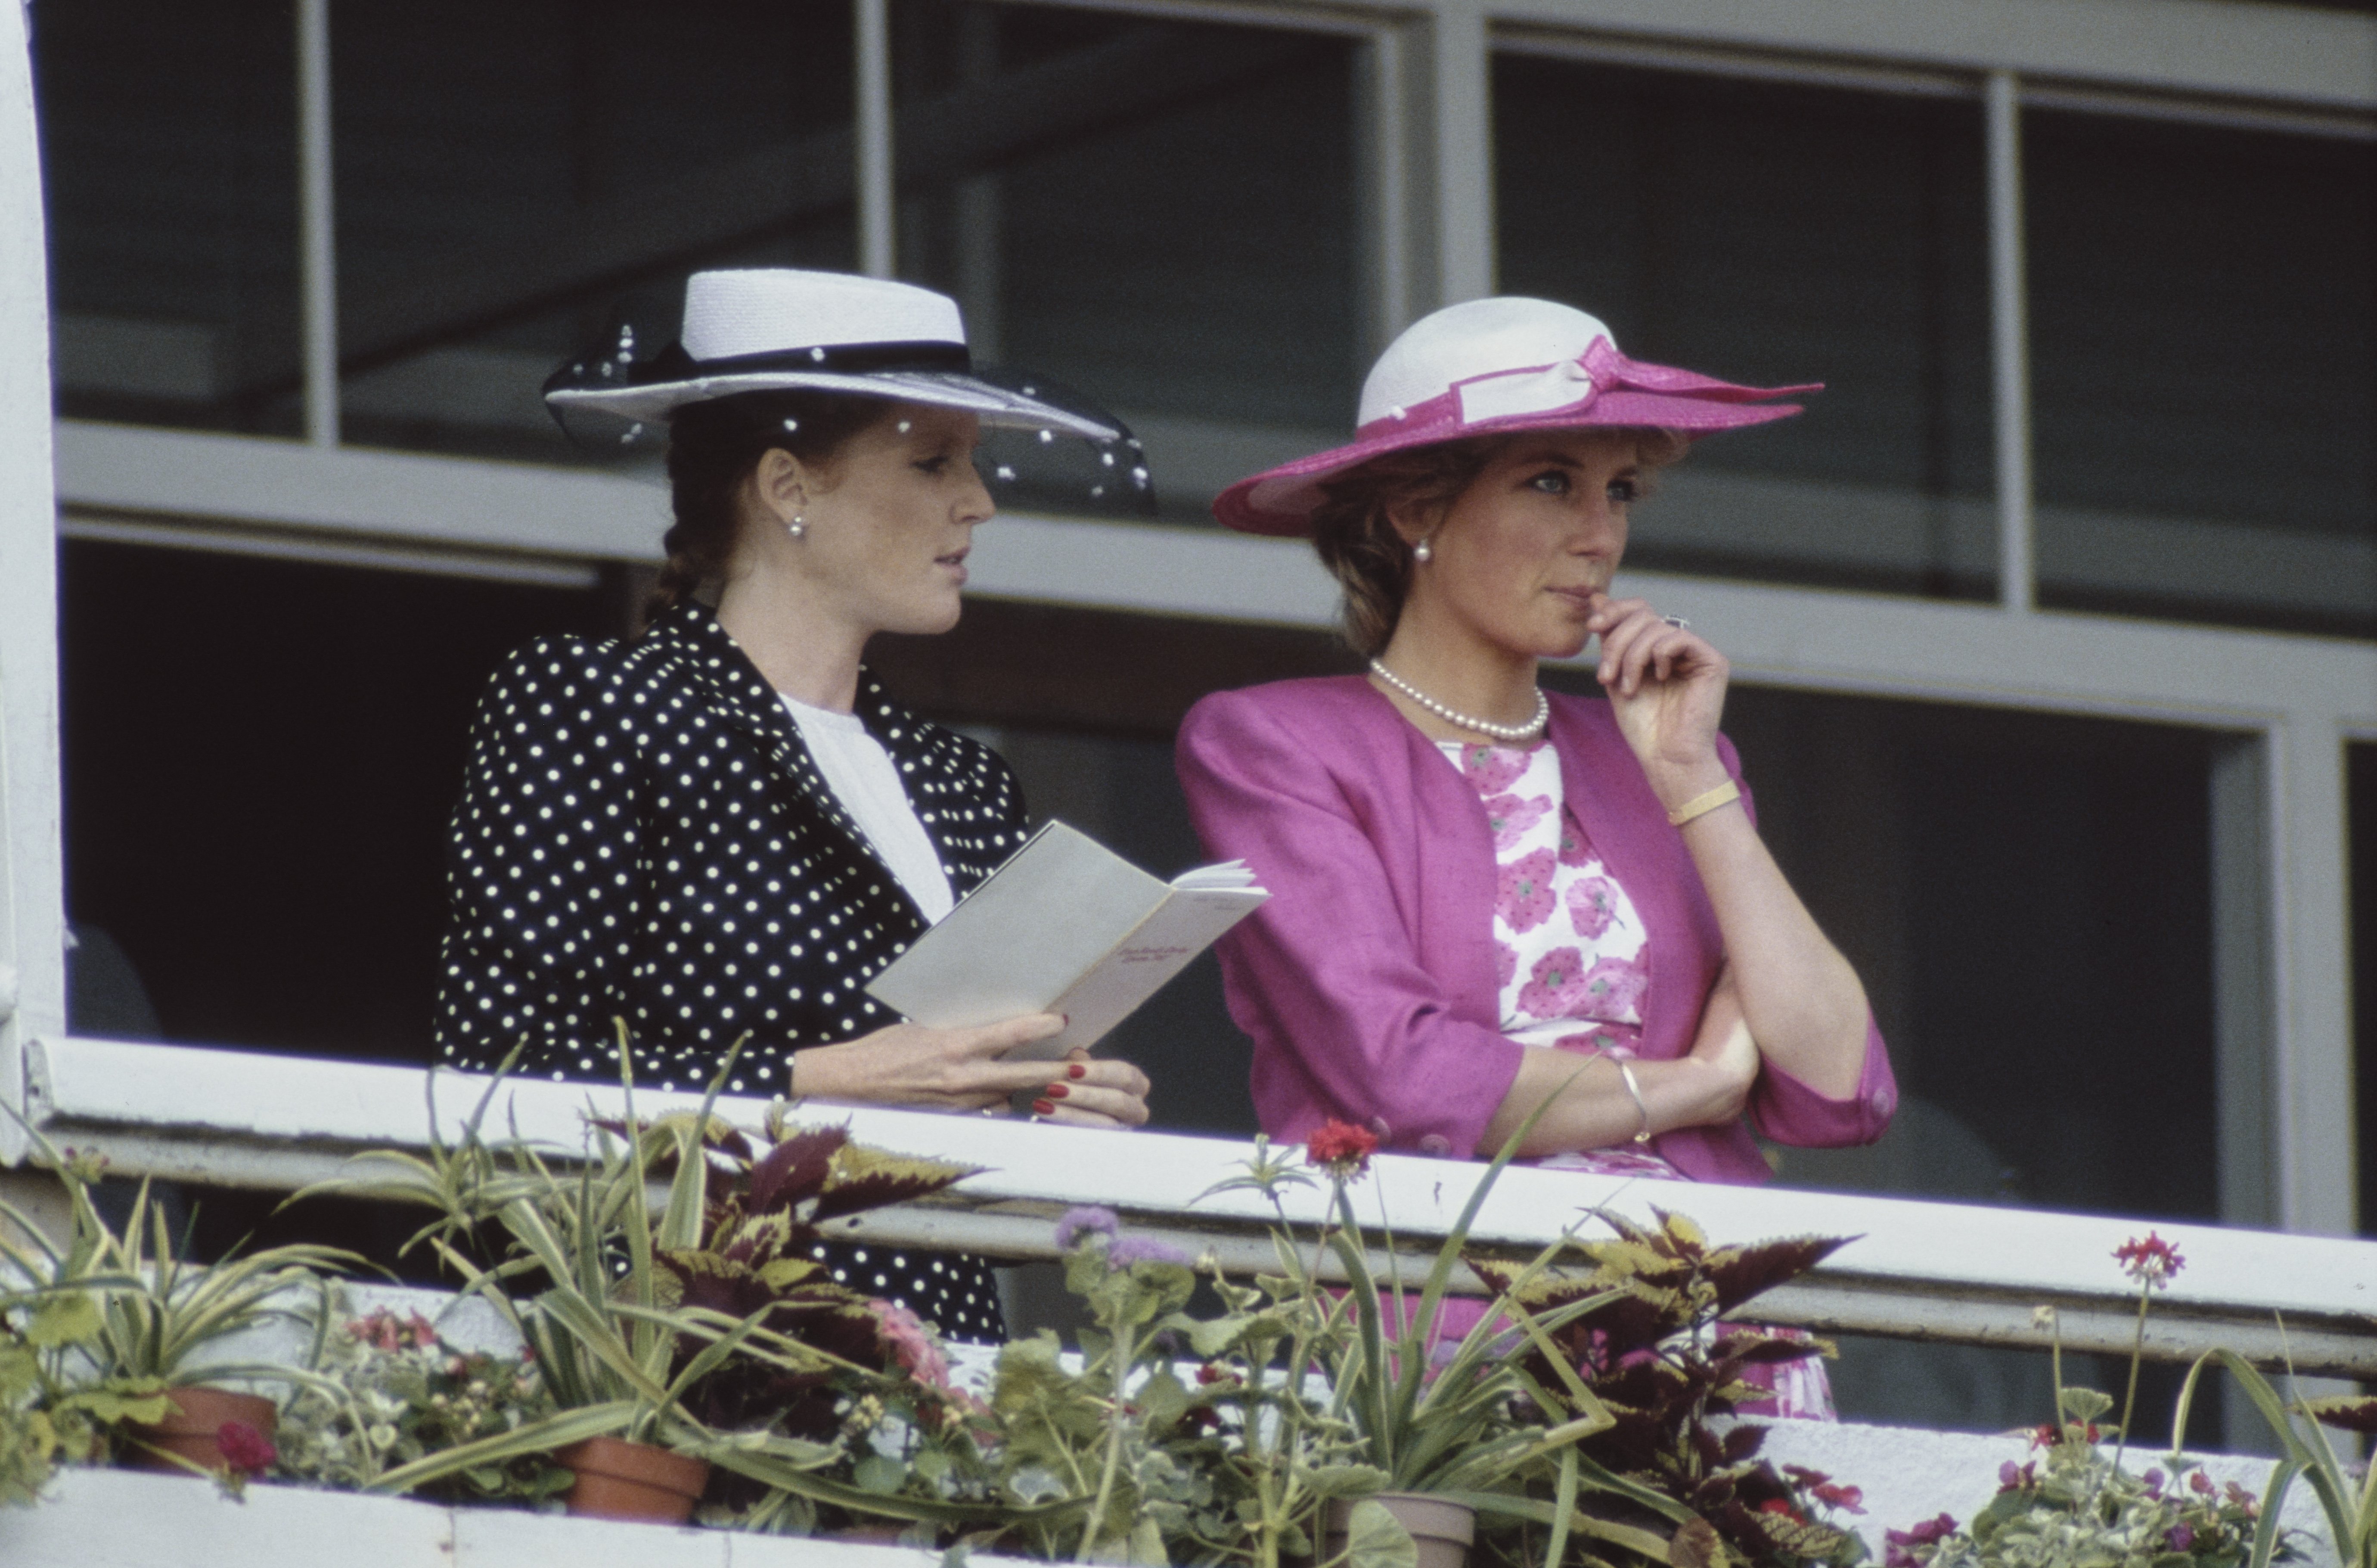 Sarah Ferguson, Duchess of York and Princess Diana attending the Derby Day meeting at Epsom Downs Racecourse on June 3, 1987 in Epsom, Surrey. | Source: Getty Images